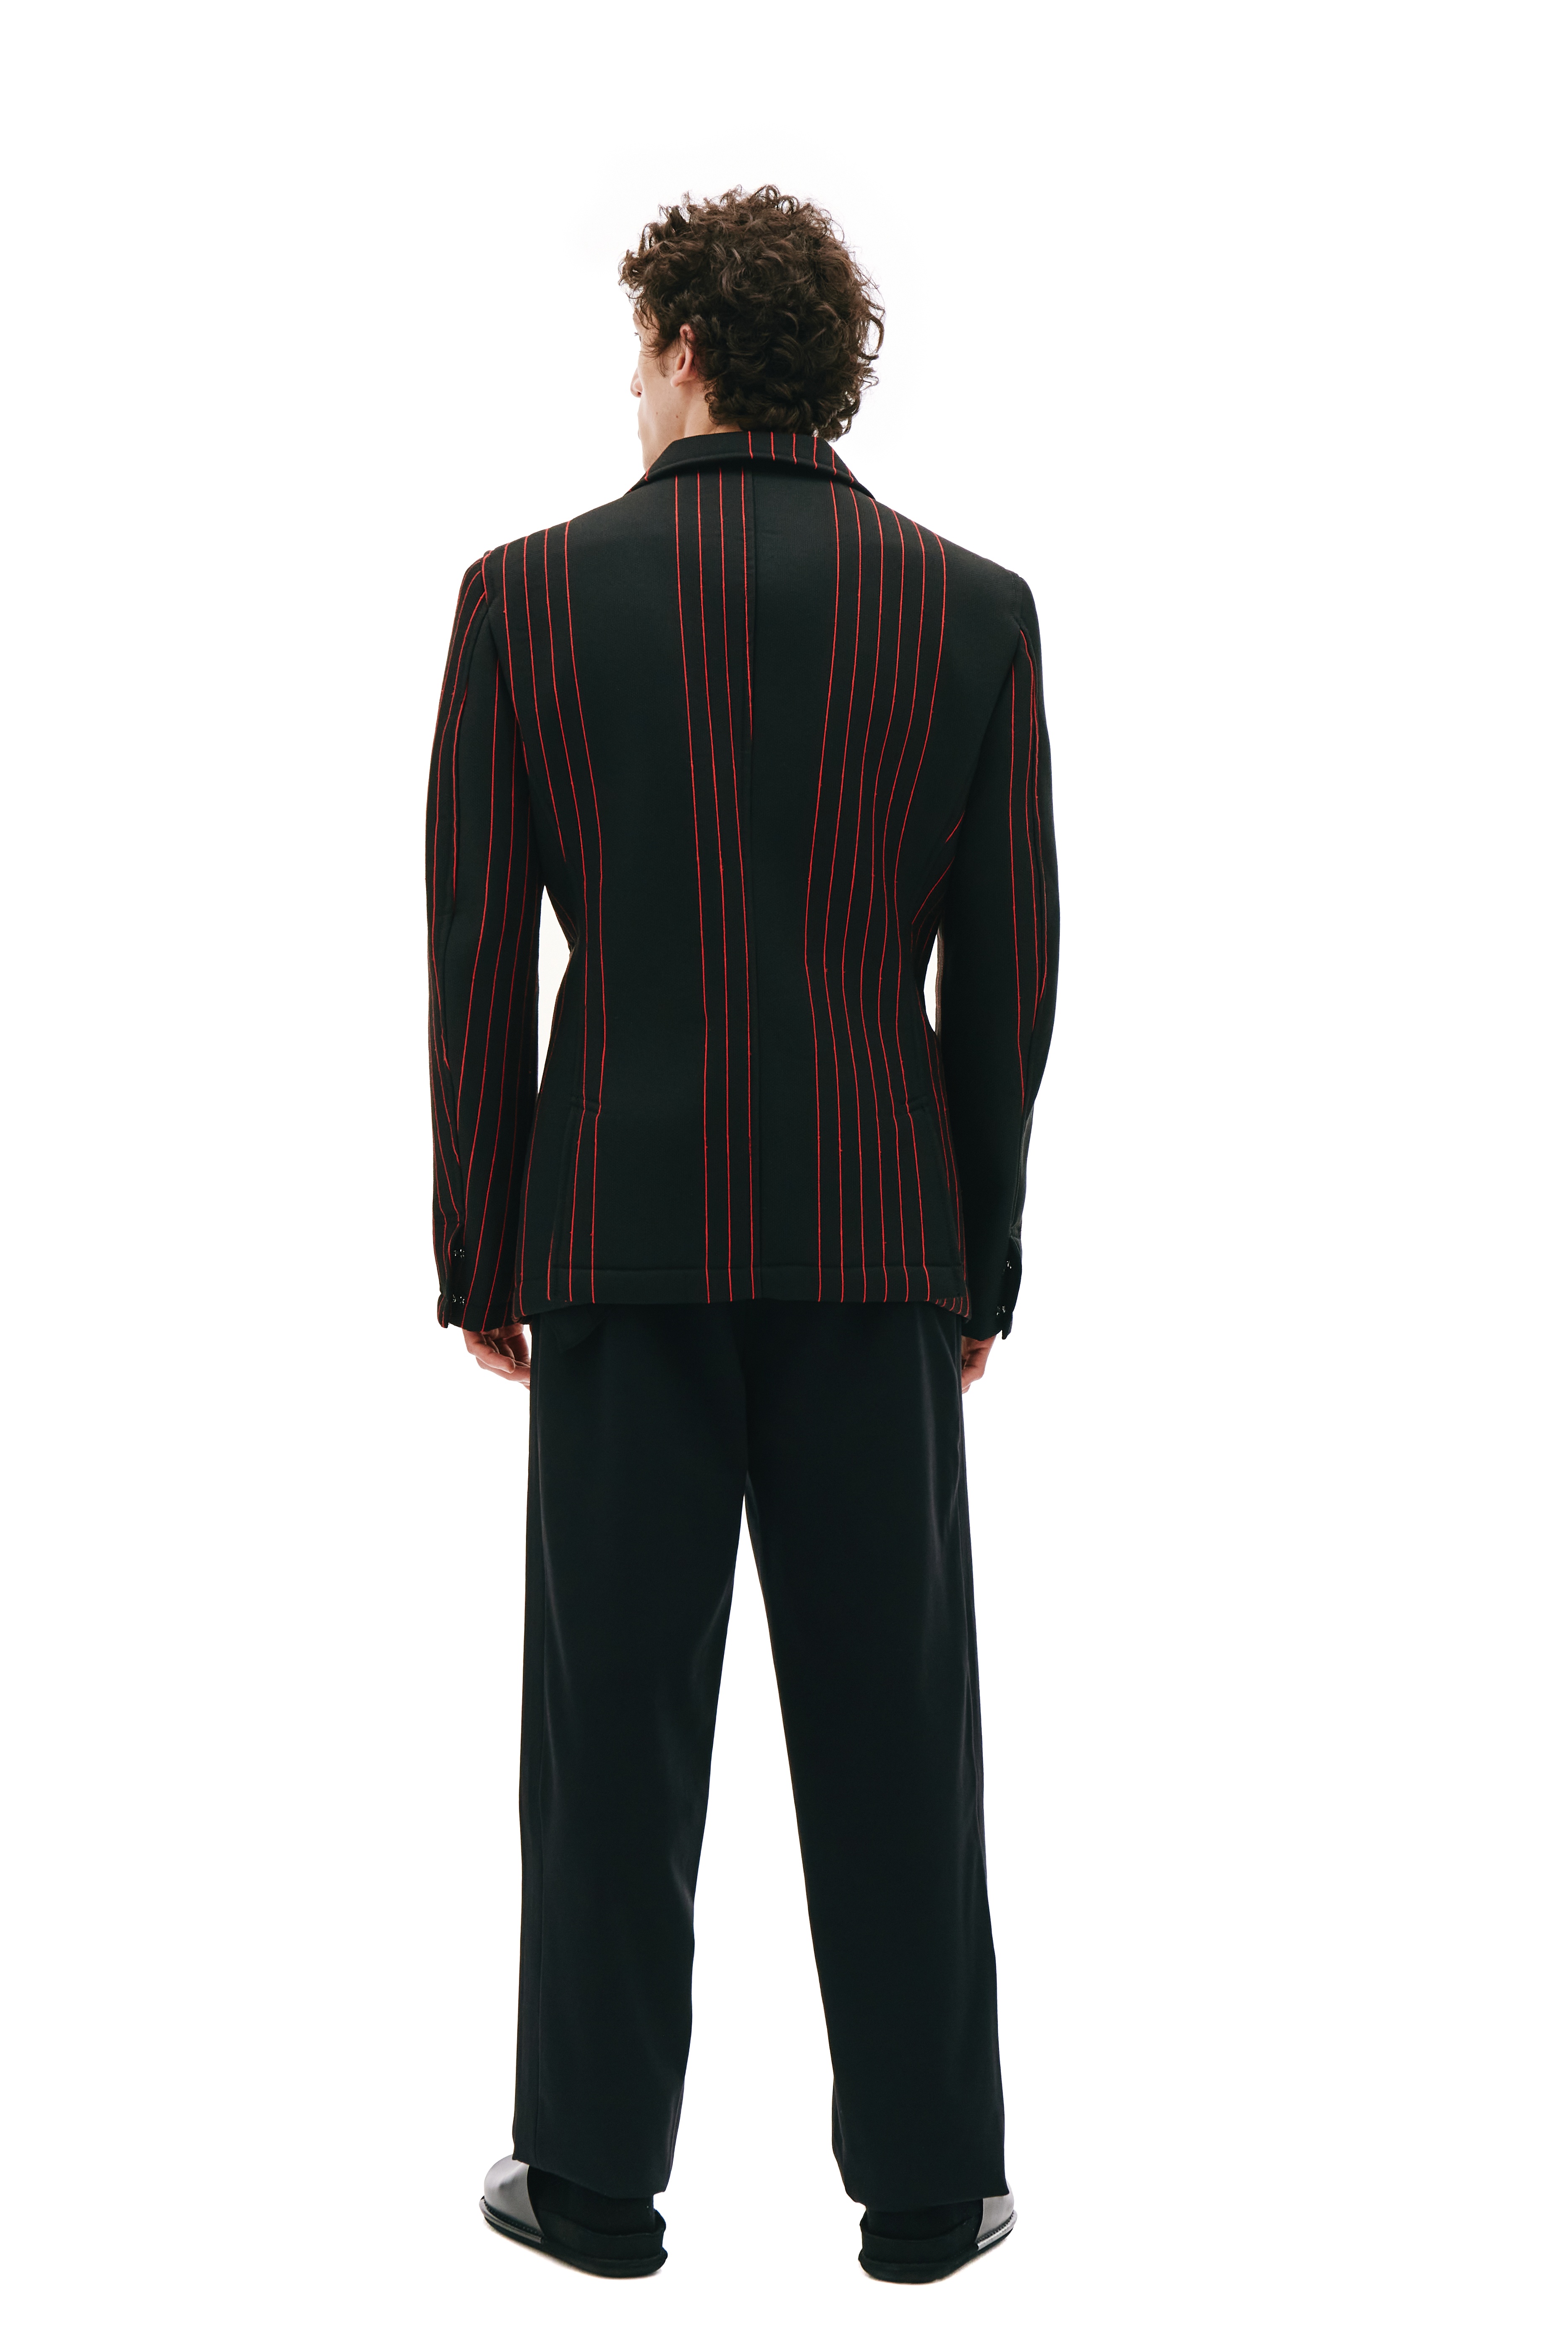 BLACK JACKET WITH RED STRIPES - 3